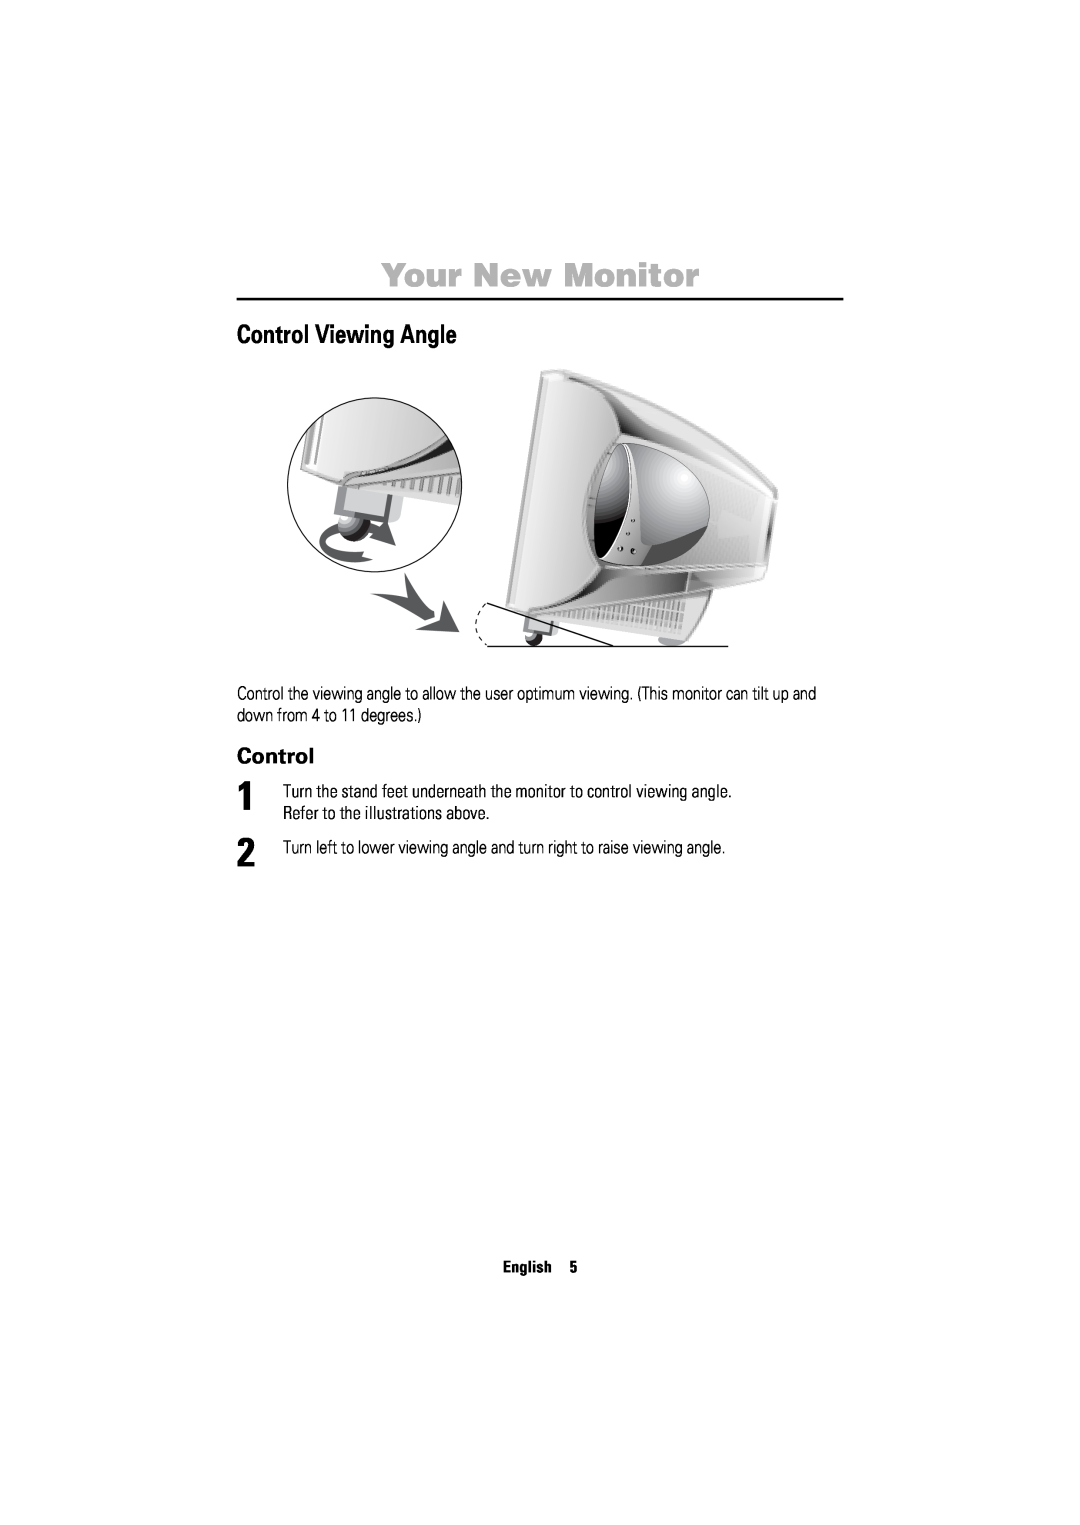 Samsung 750ST manual Control Viewing Angle, Refer to the illustrations above, Your New Monitor, English 